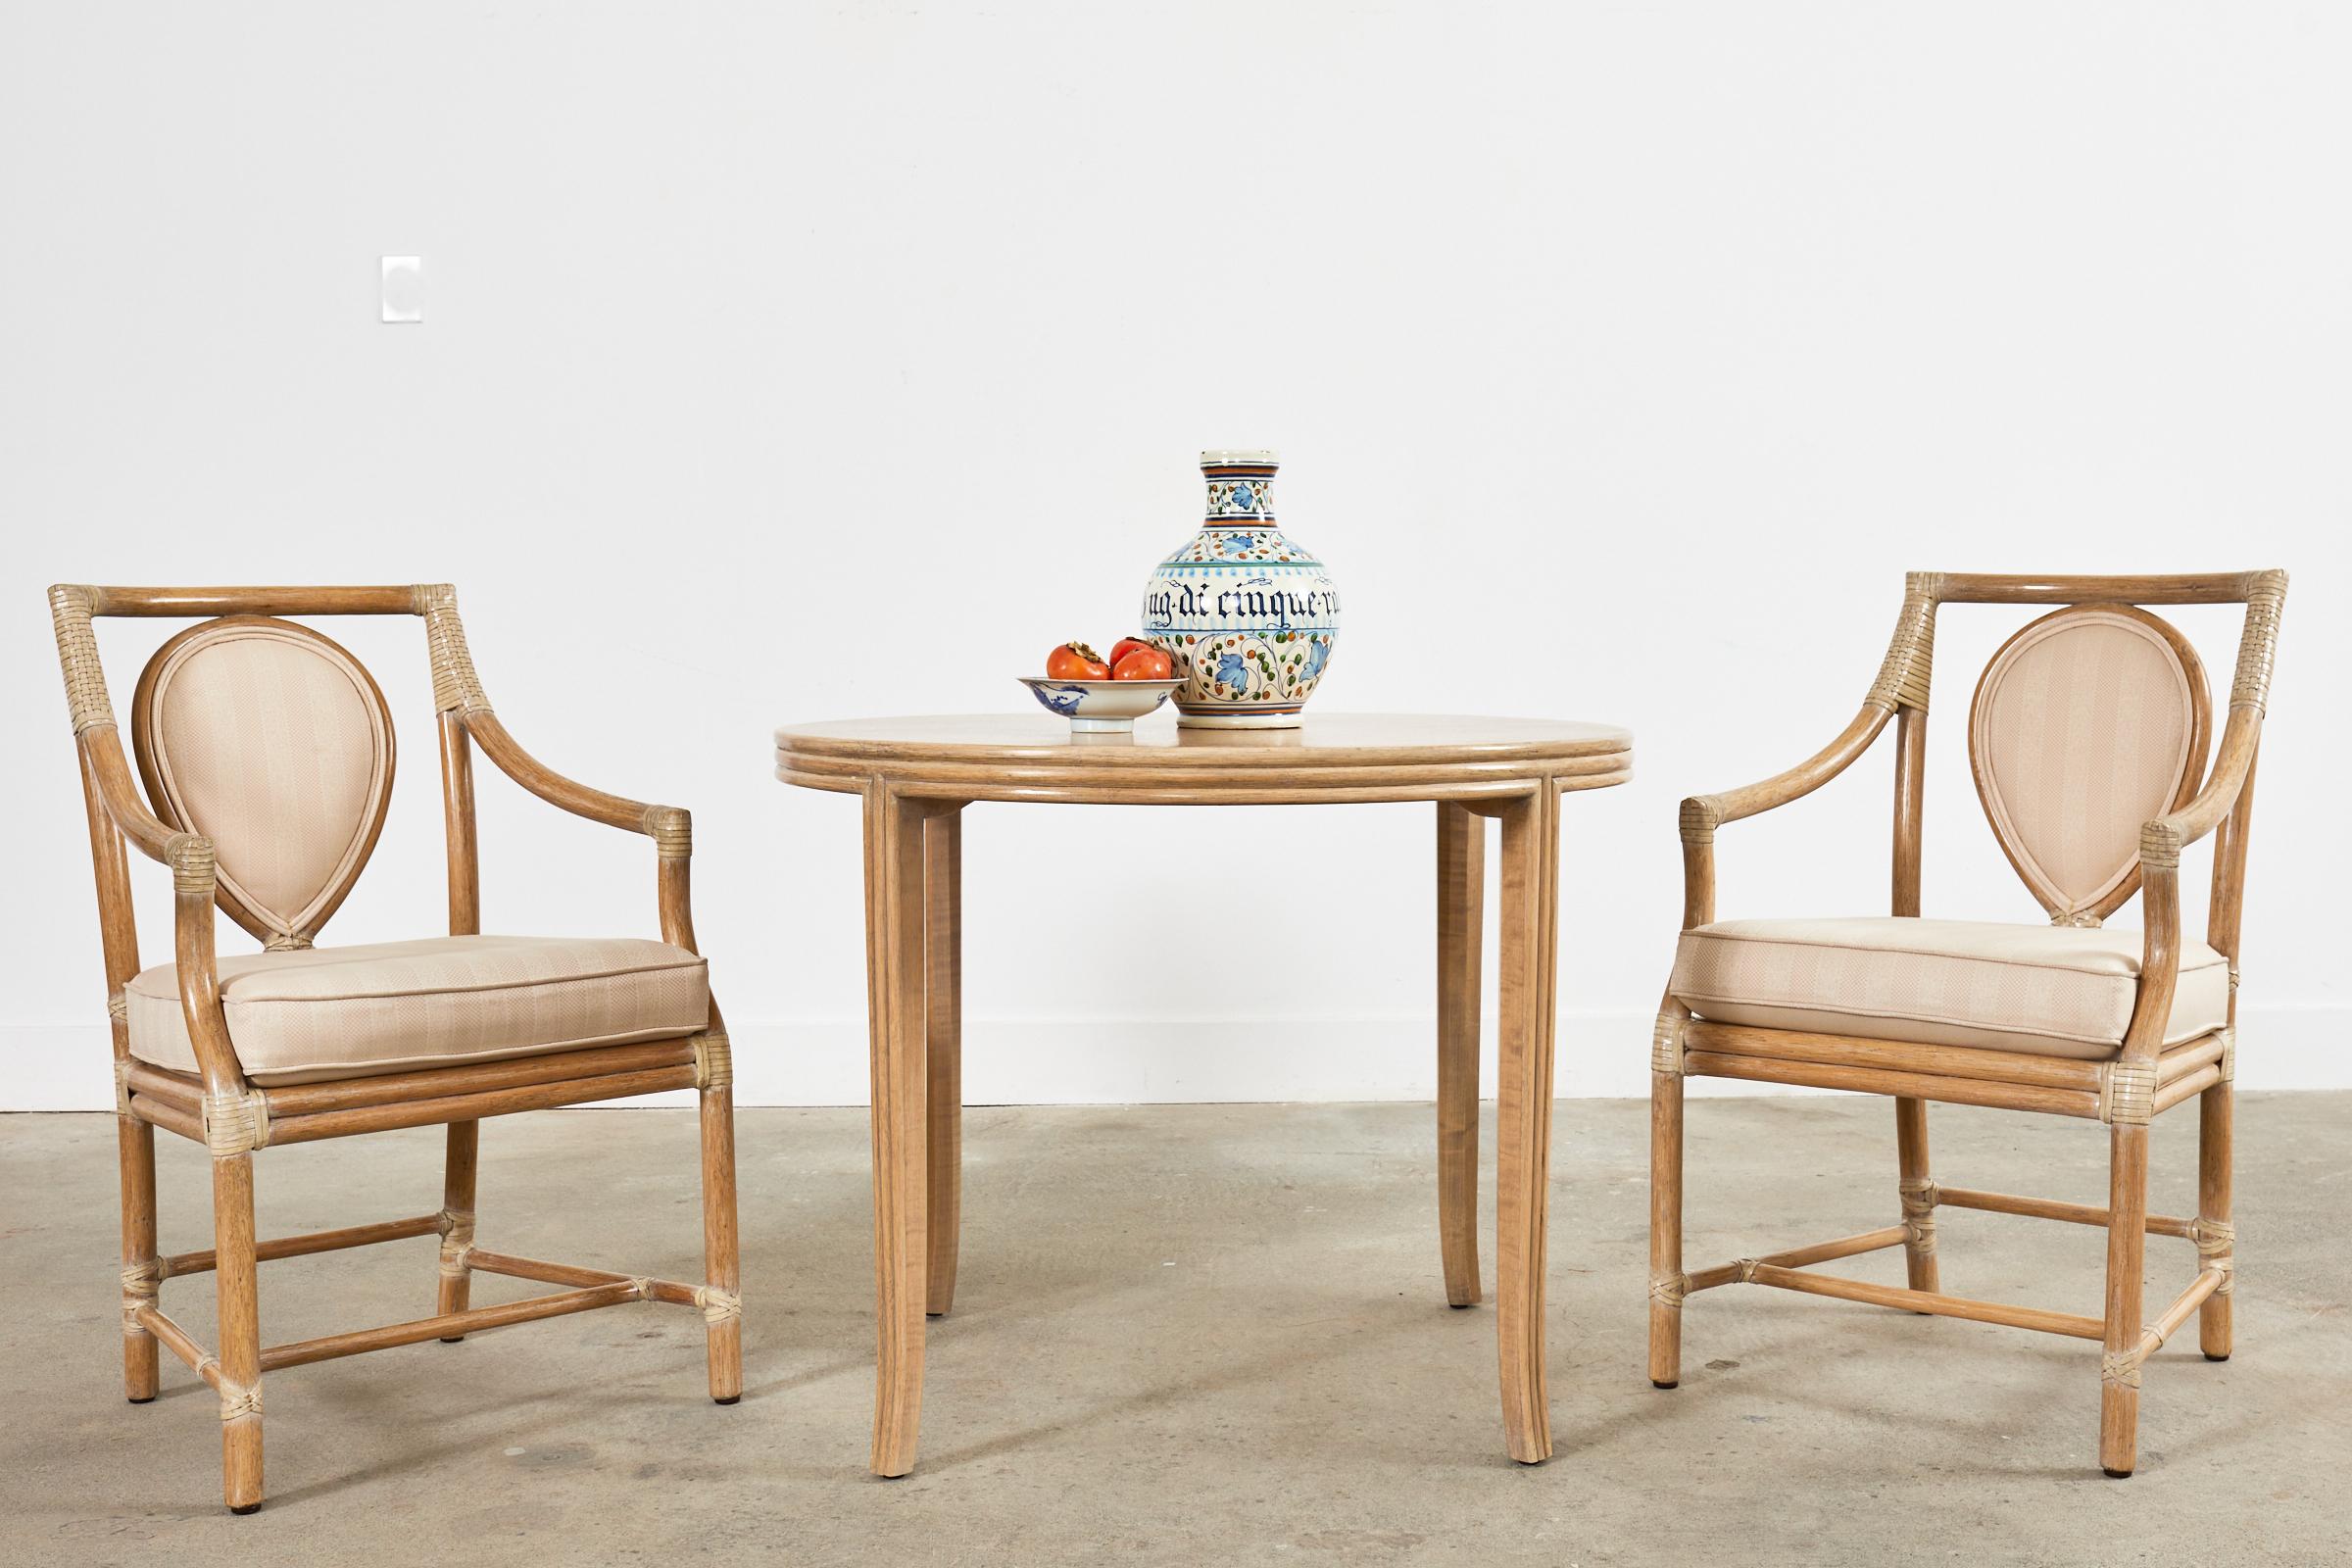 Gorgeous round rattan and oak breakfast dining table or center table made in the coastal organic modern style by McGuire. The elegant table features an oak frame veneered on the sides and legs with split rattan poles giving the edges a reeded